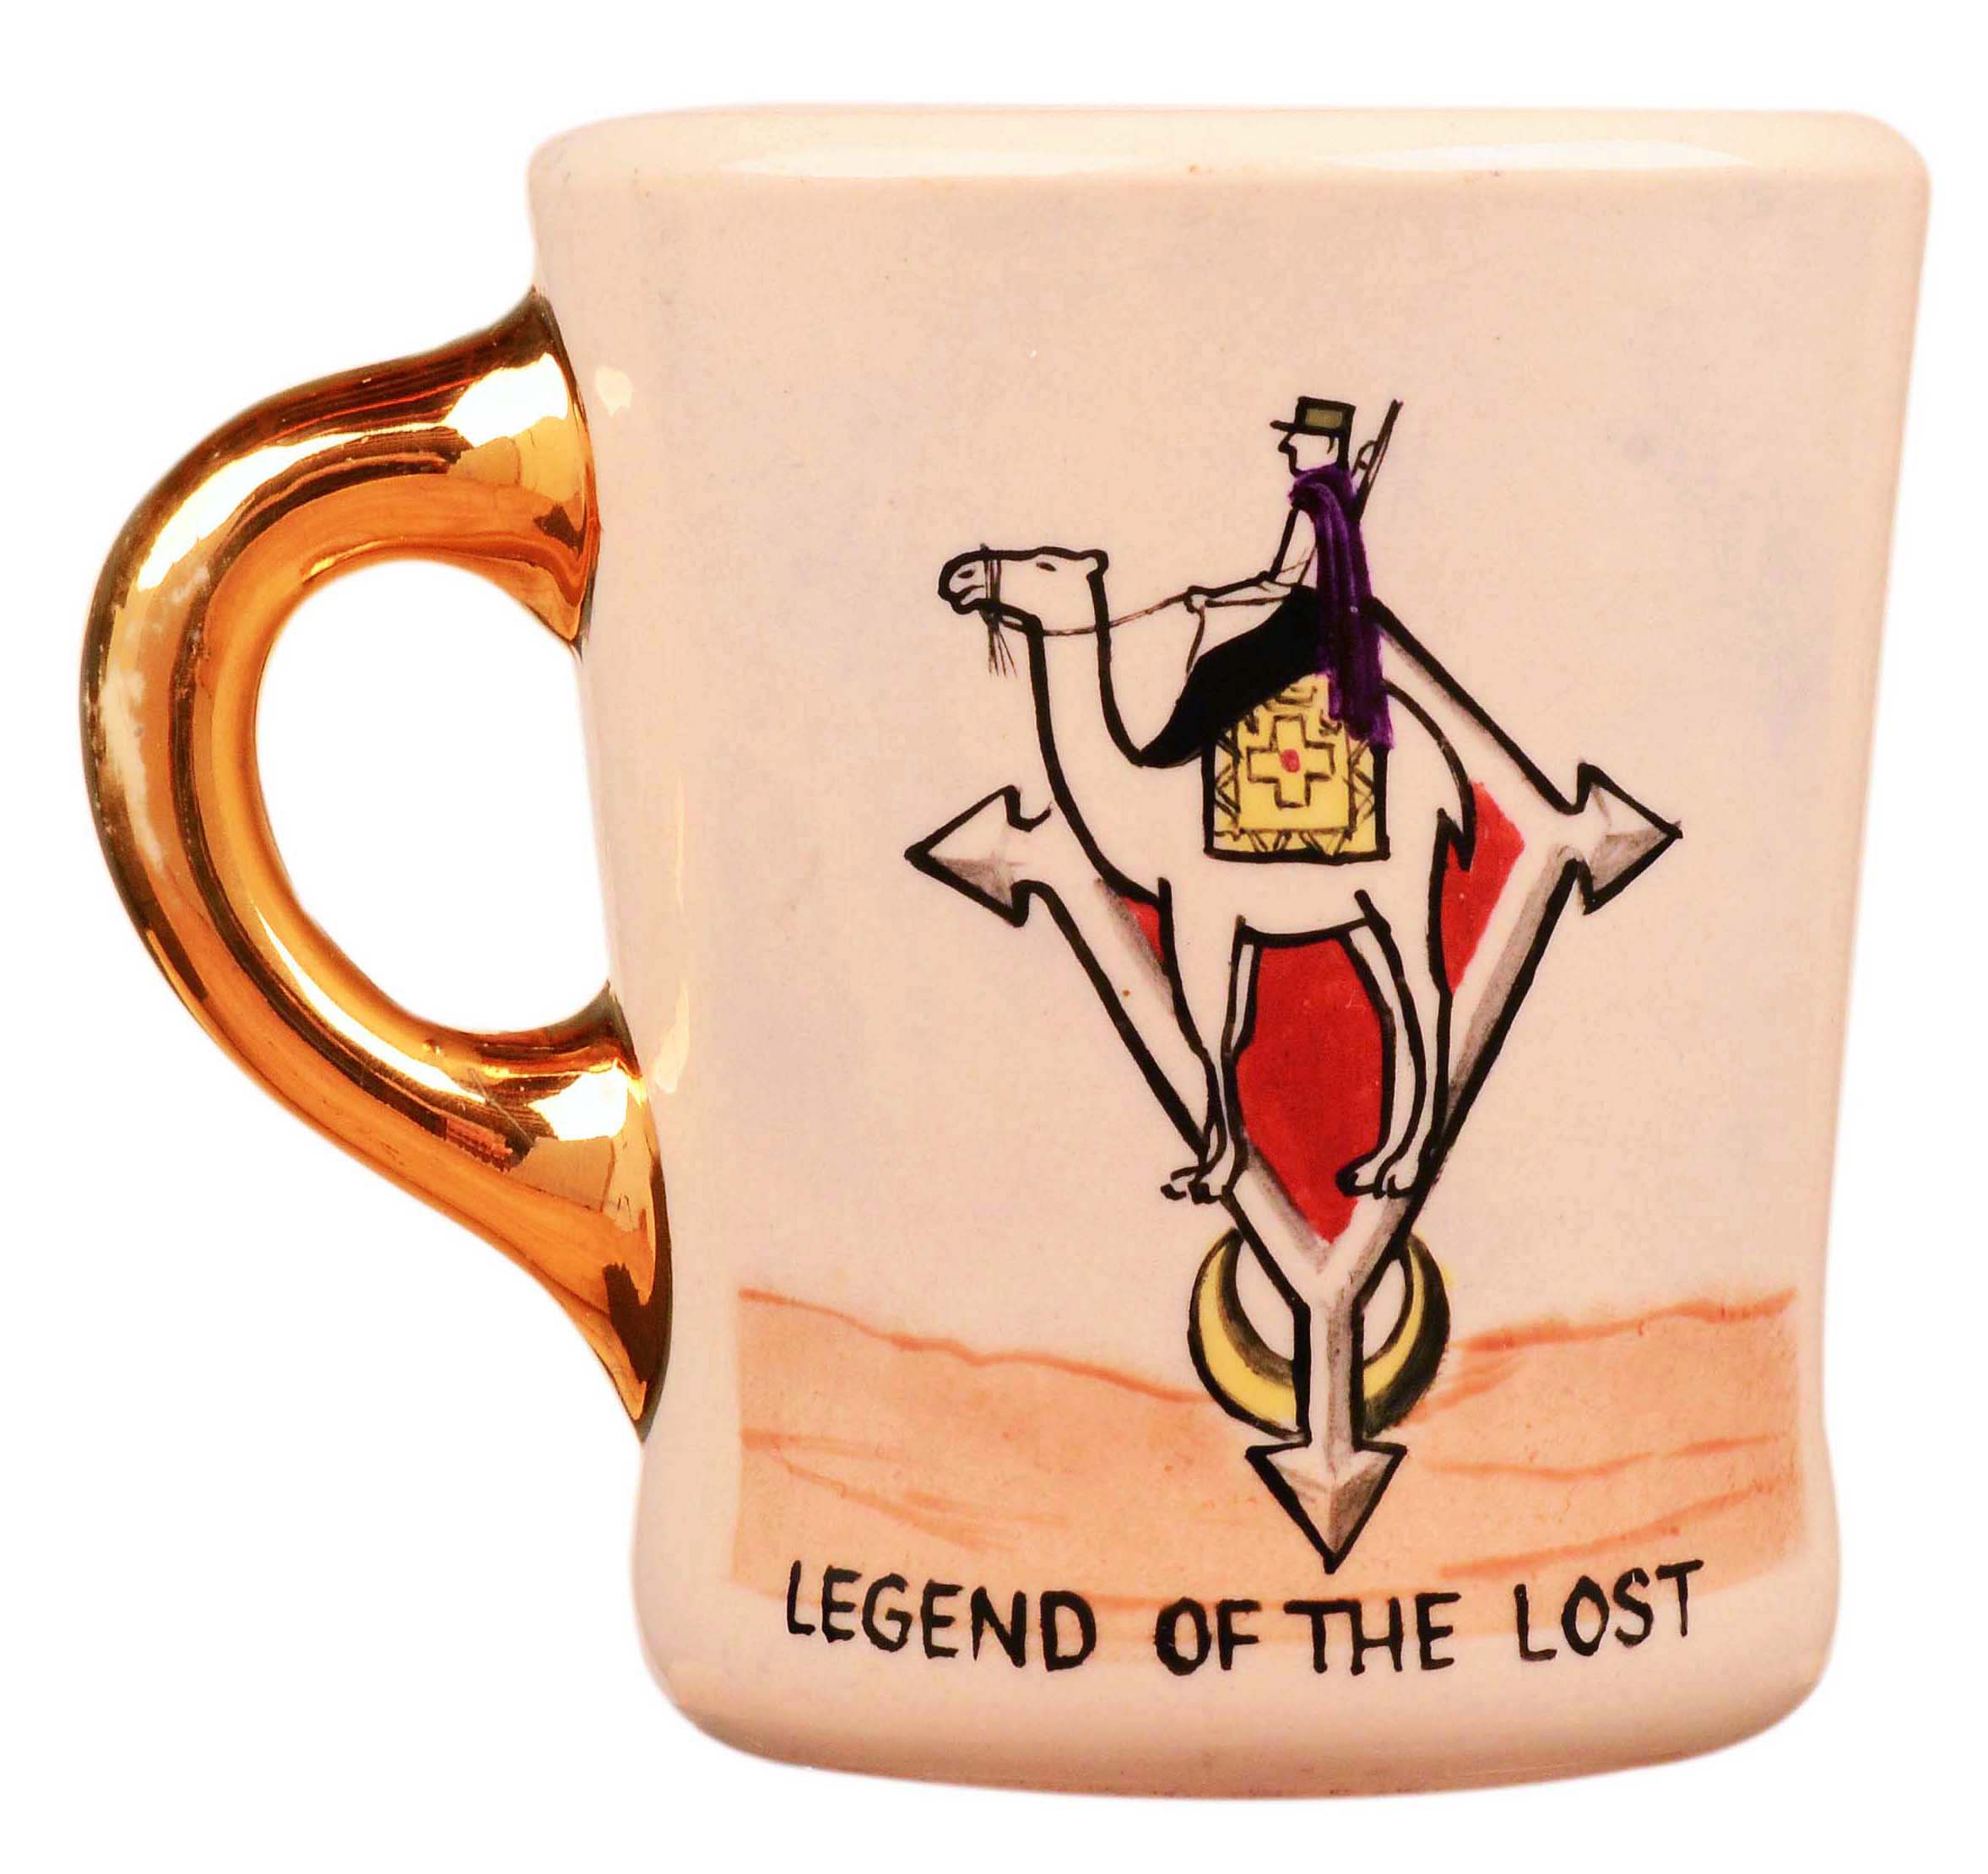 John Wayne mug for the 1957 movie Legend of the Lost, front.